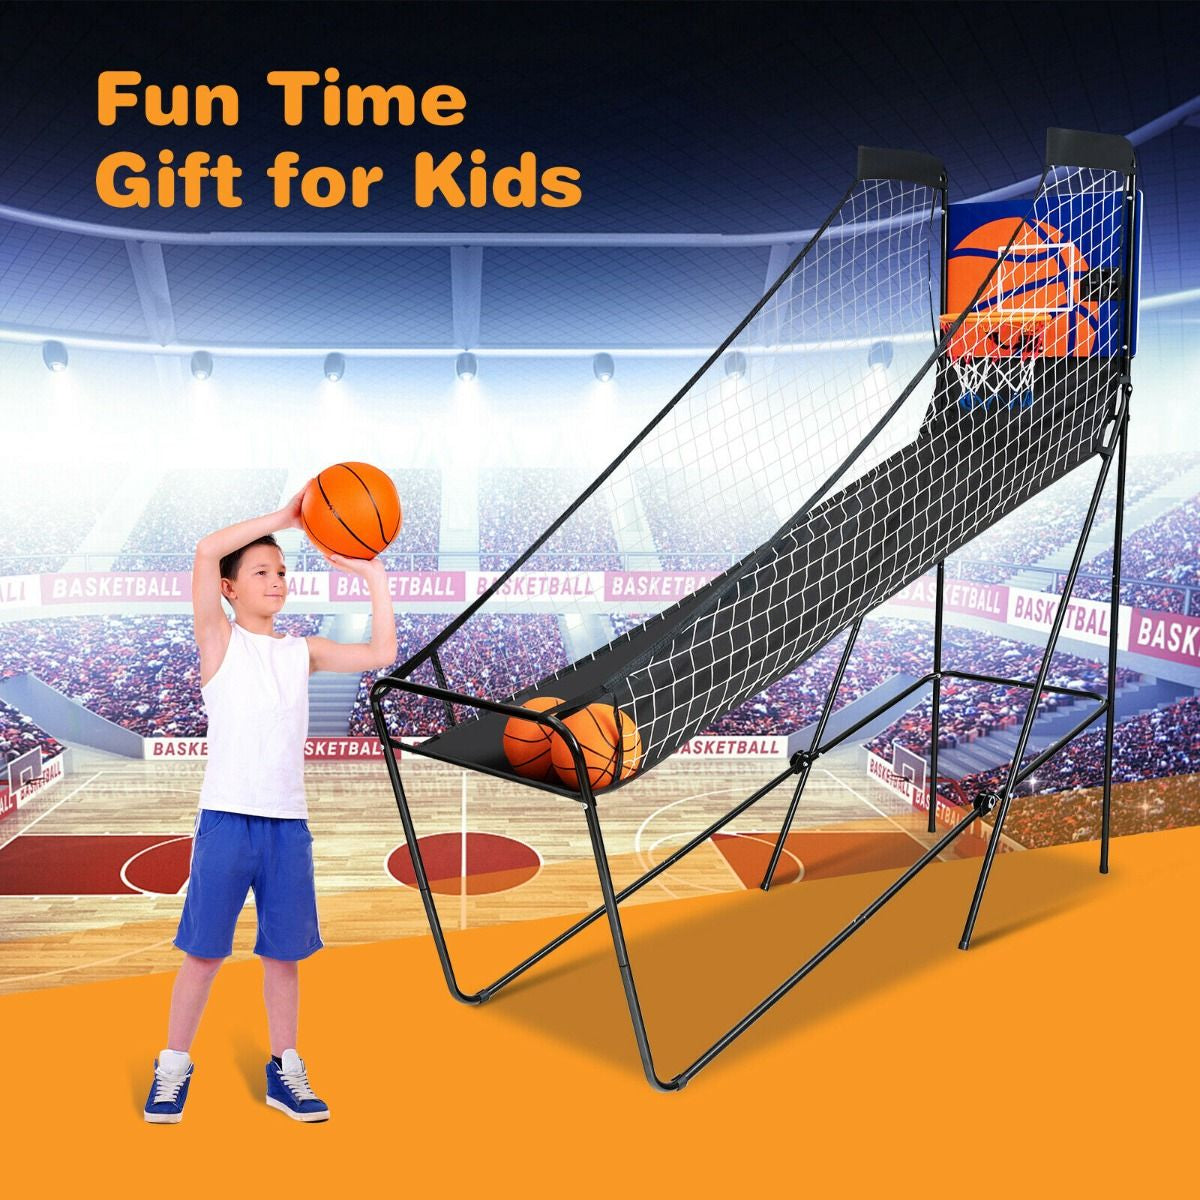 Folding Basketball Arcade Game with Electronic Scorer and Buzzer